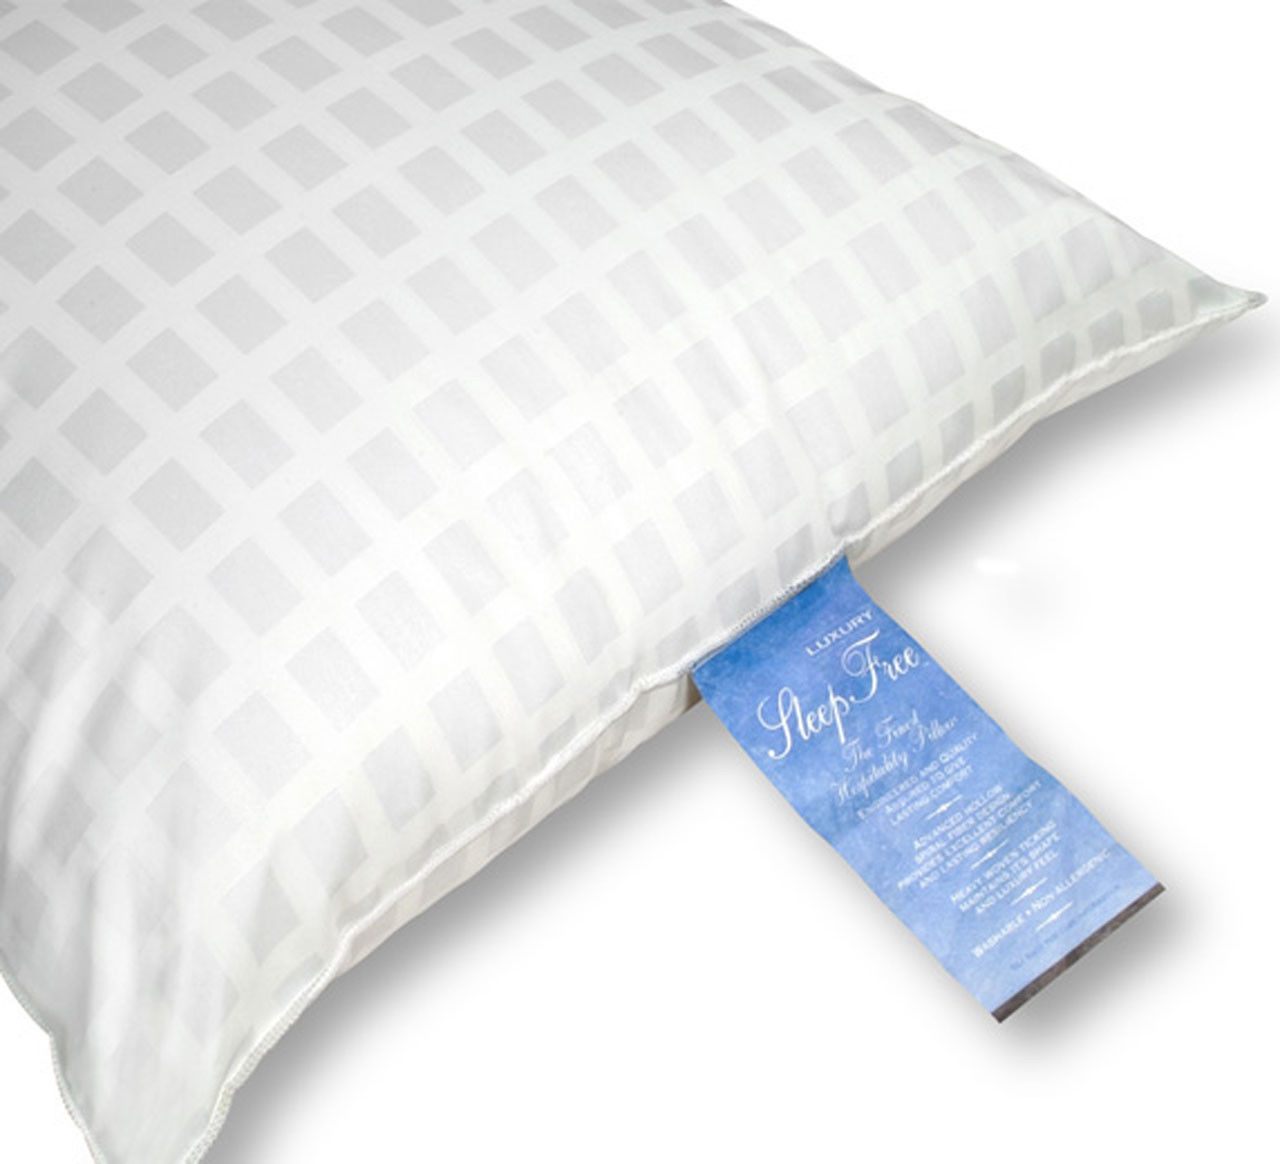 Sleep Free Pillow Questions & Answers